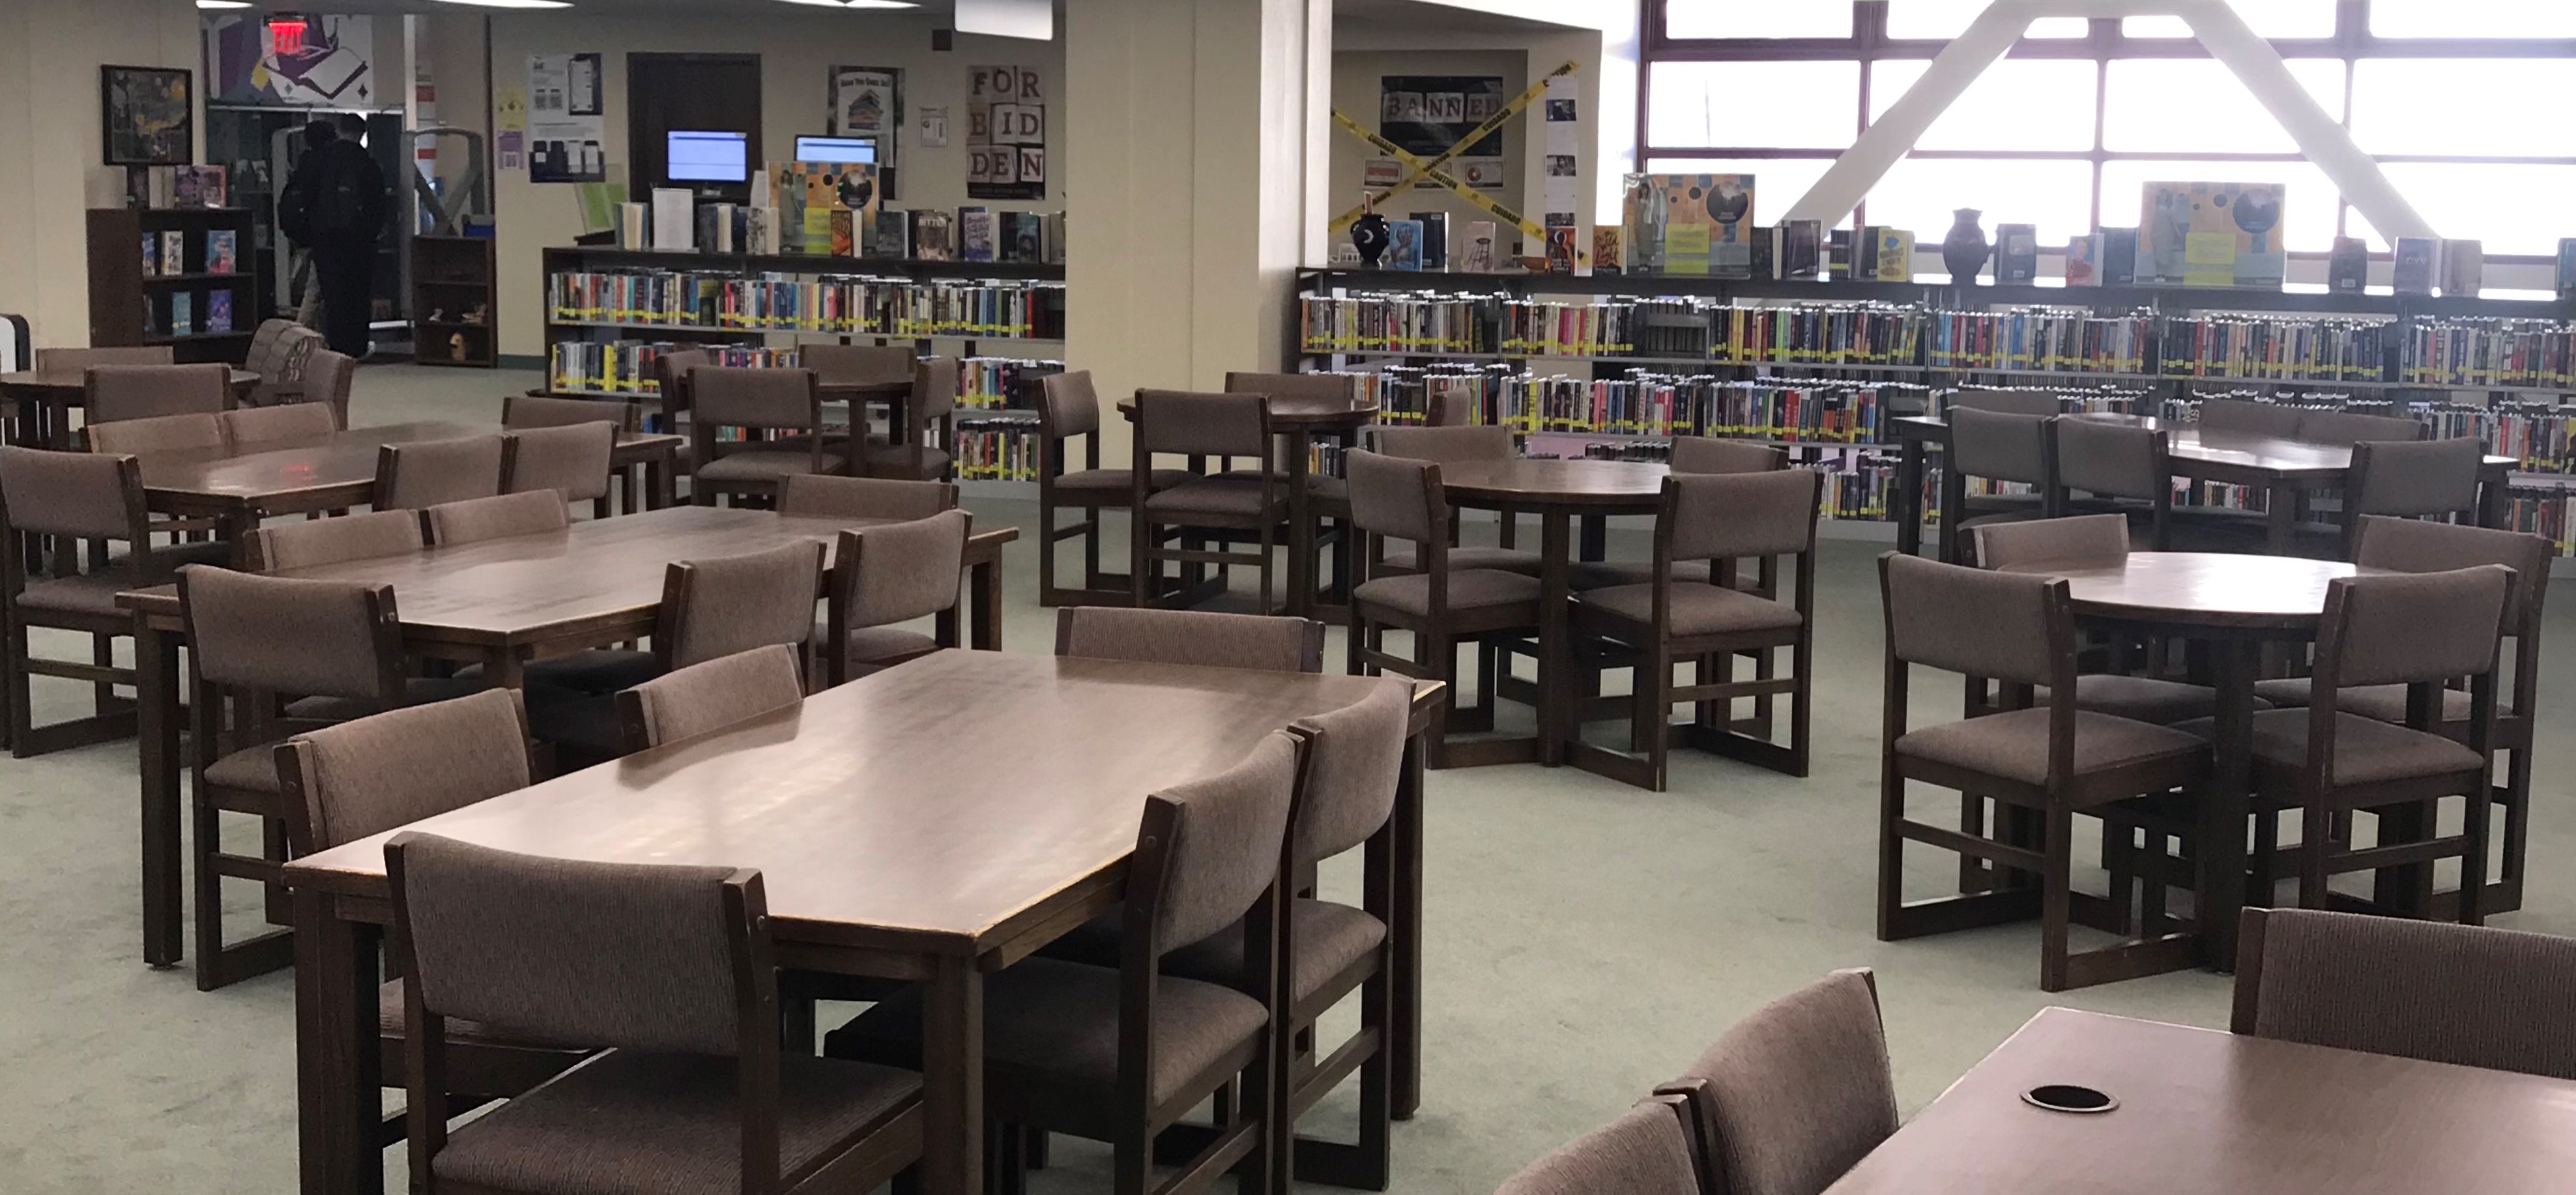 Picture of the inside of the library at Johansen